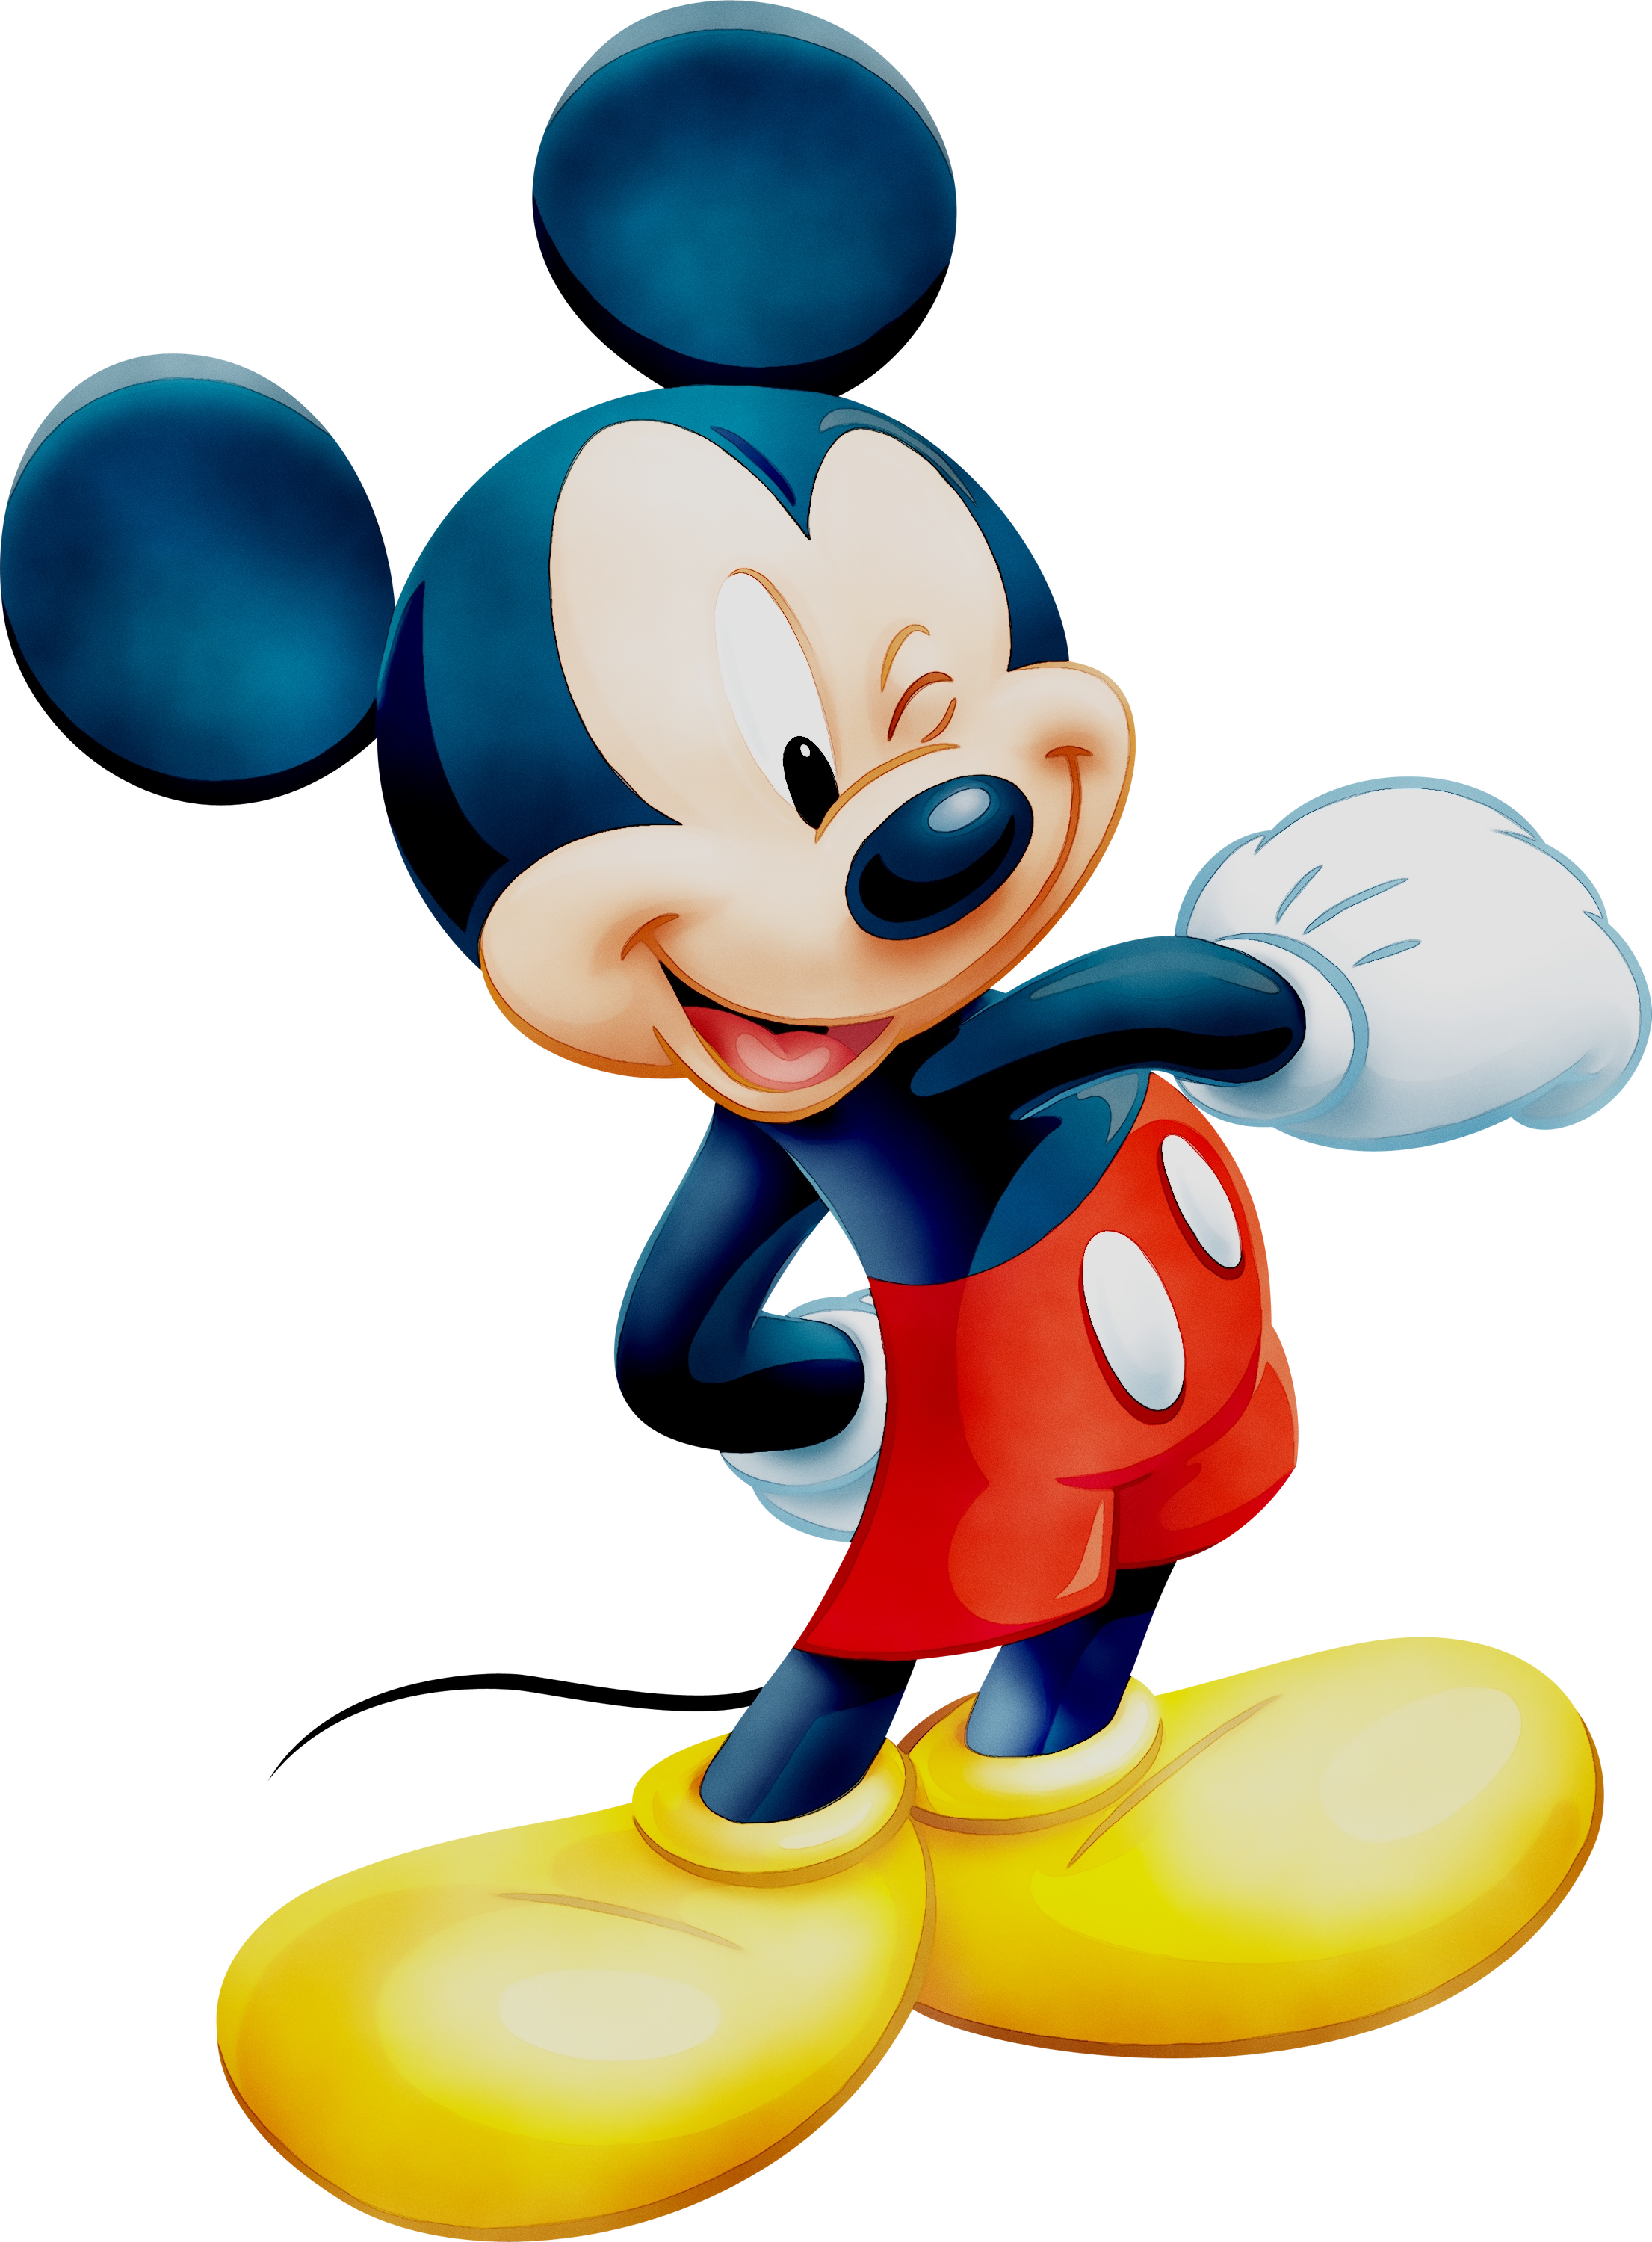 Mickey Mouse Pluto Minnie Mouse The Walt Disney Company Donald Duck ...